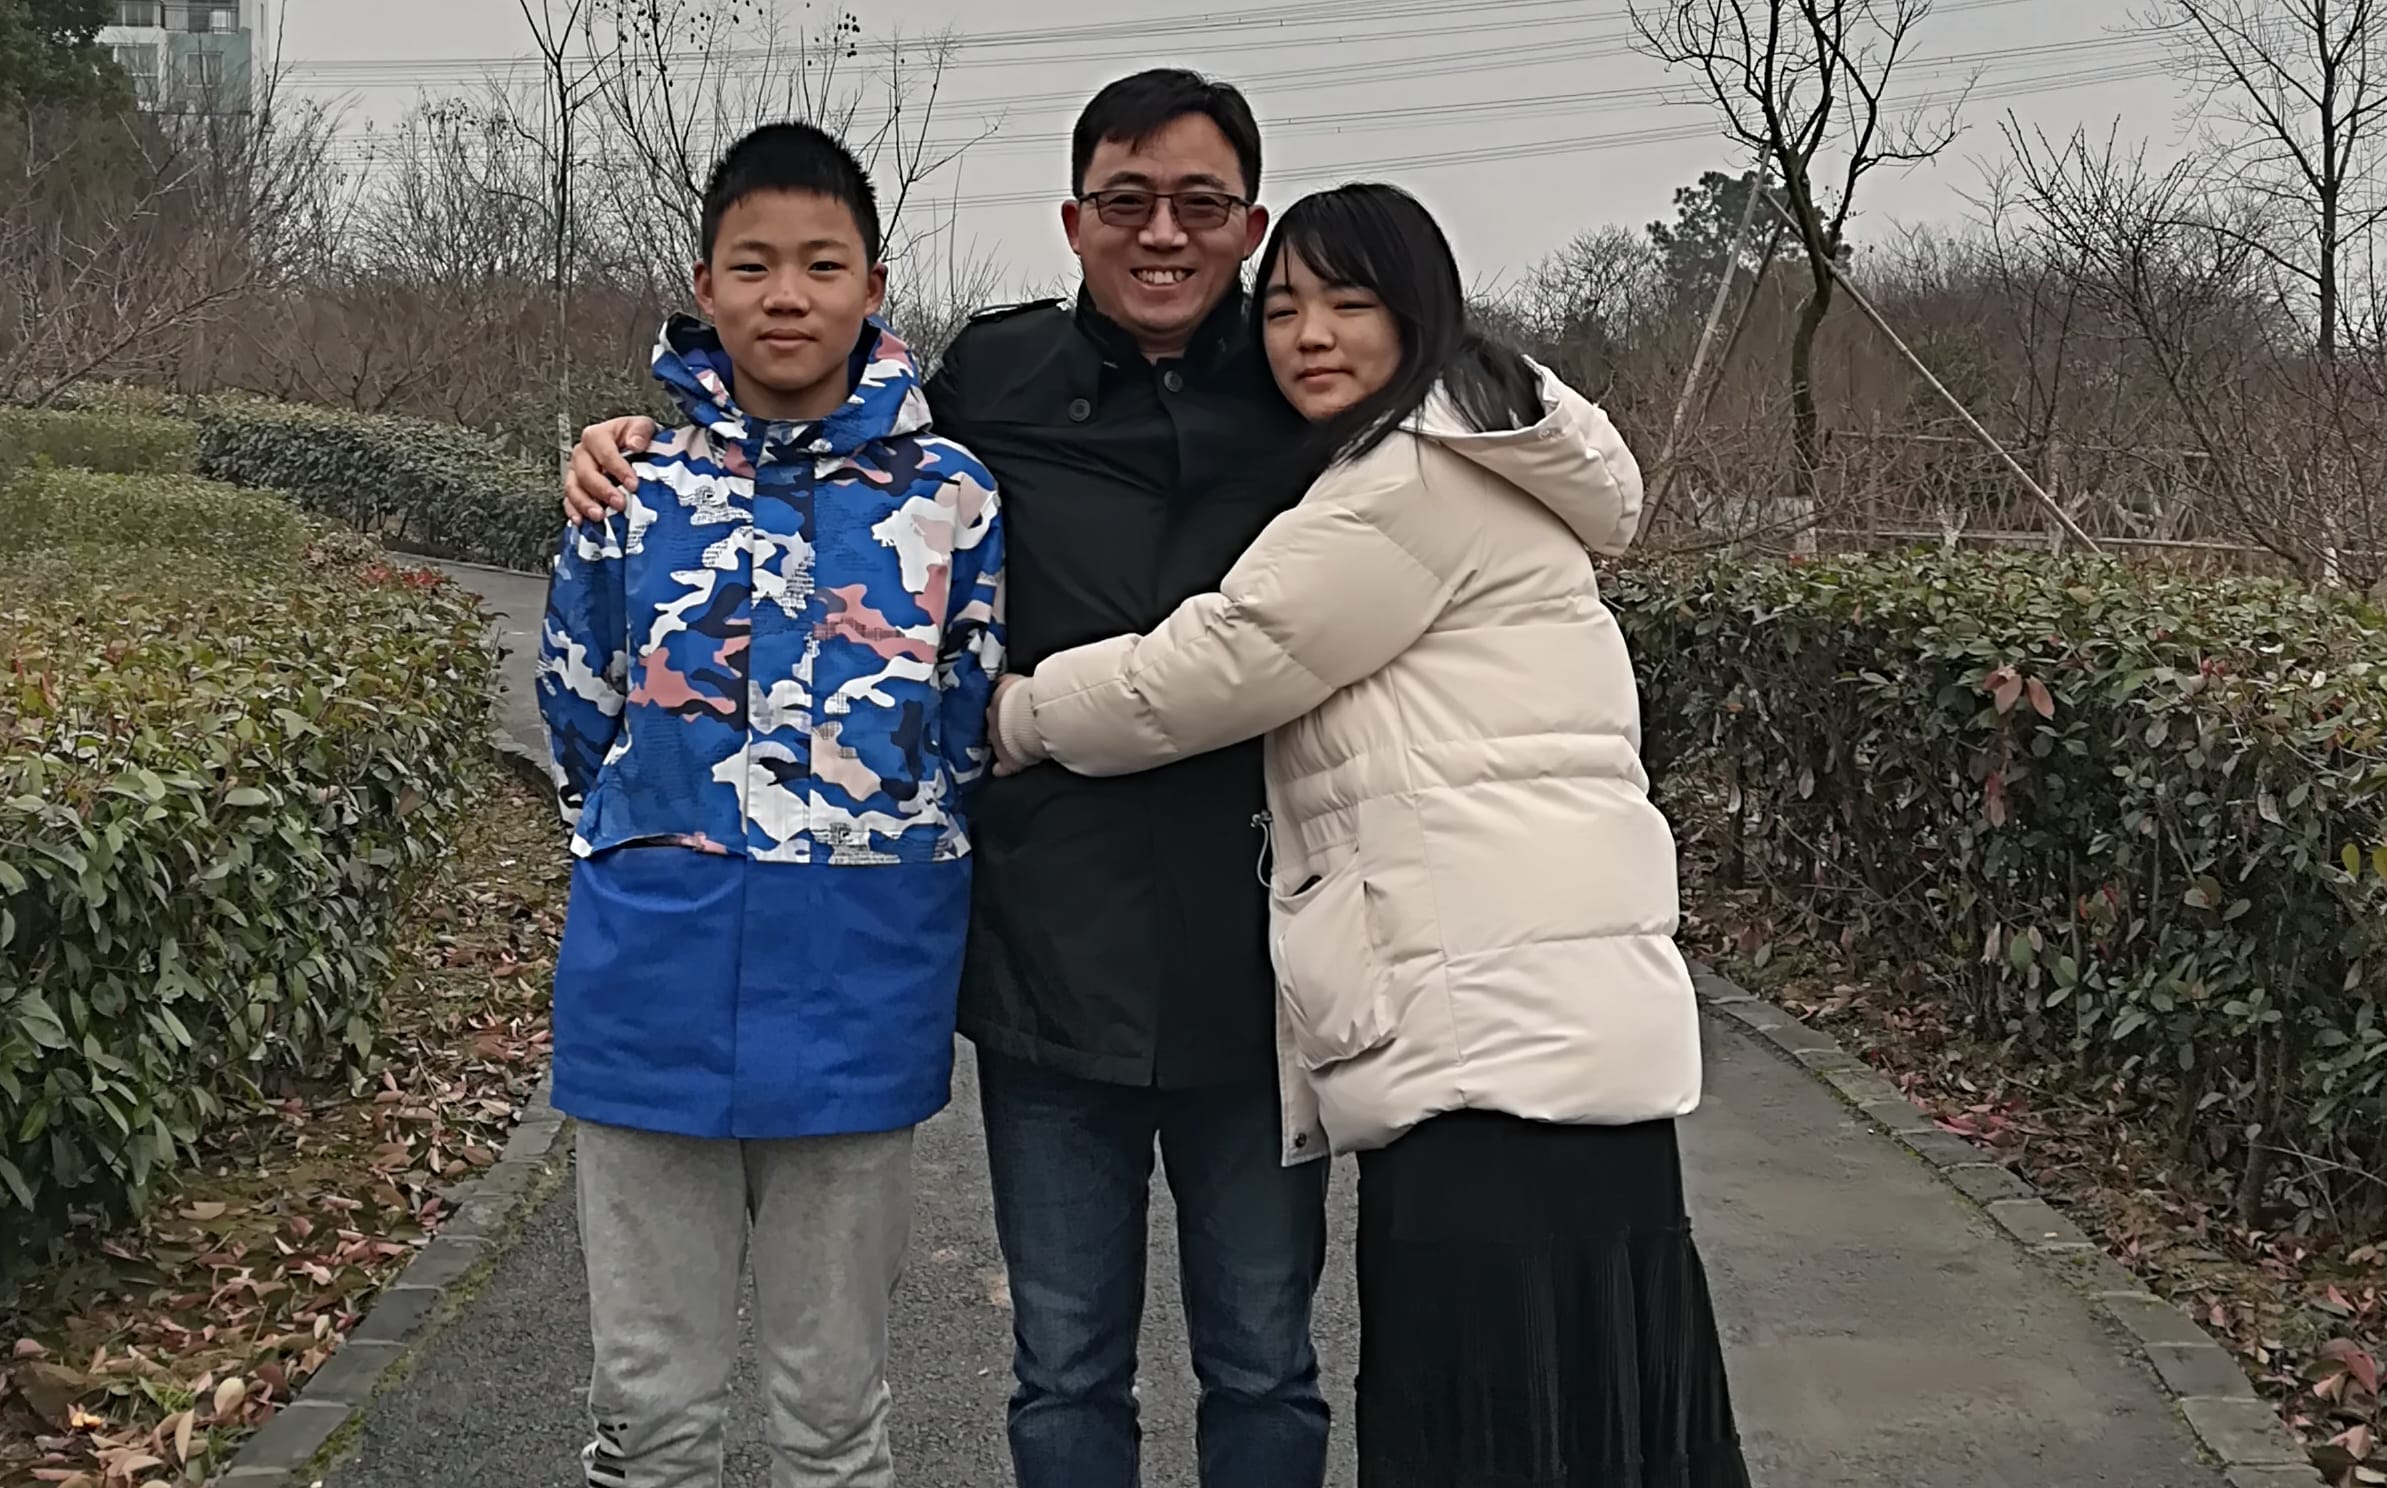 Stephen Wang with his two children, Joshua and Shannon, in Shanghai.